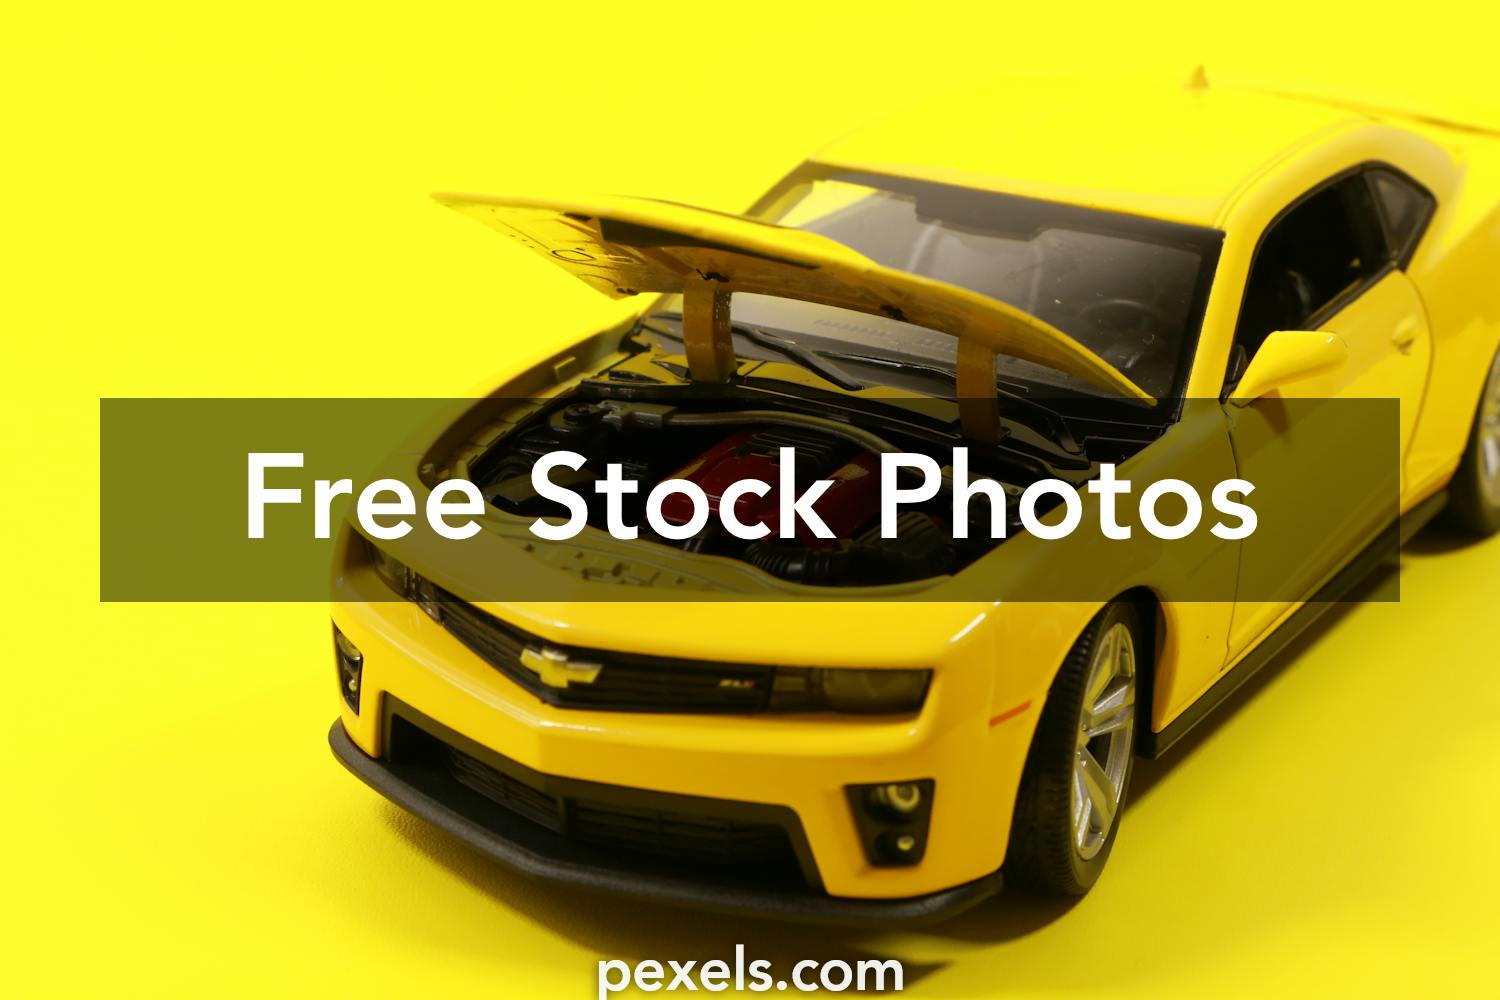 Download Yellow Images Of Pj Mask Toys Free Stock Photos PSD Mockup Templates